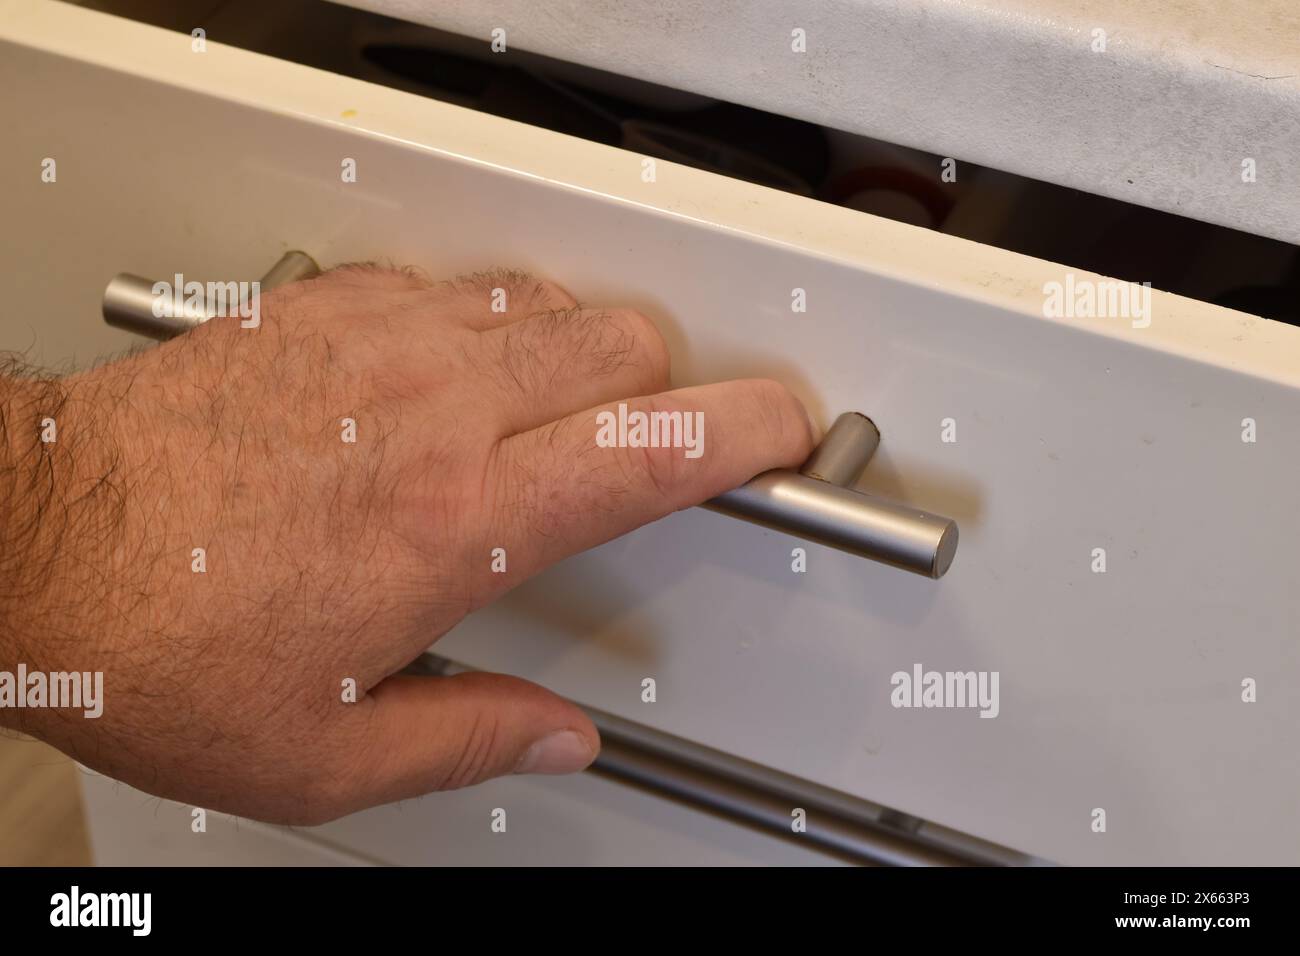 The photo shows a man's hand resting on the handle of a desk drawer. The man pulls out the desk drawer, grasping the metal handle. Stock Photo